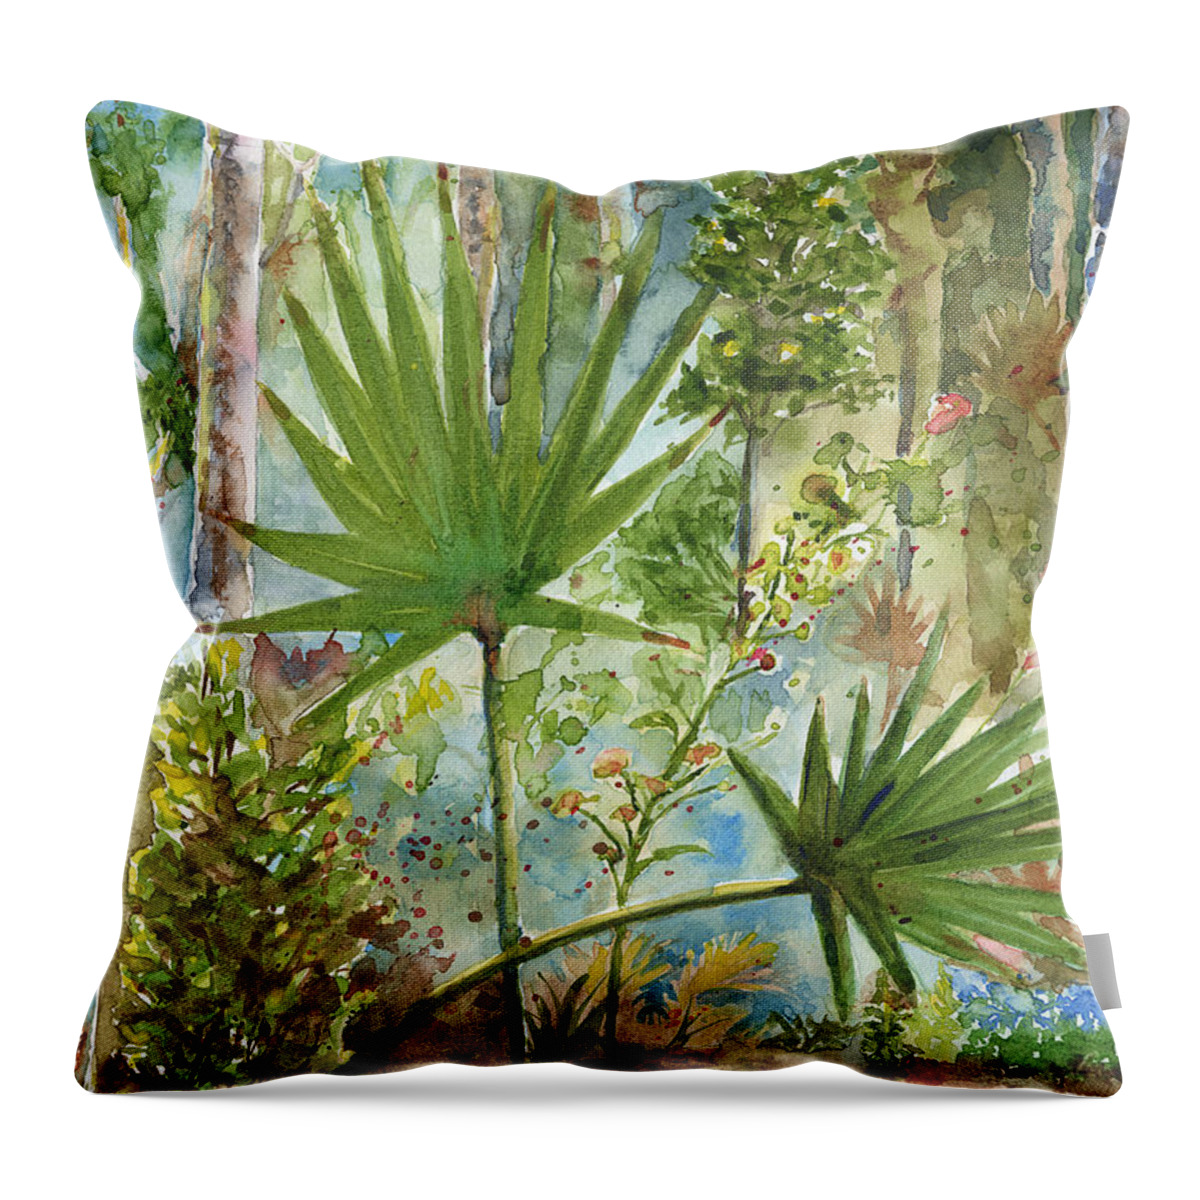 Foliage Throw Pillow featuring the painting The Preserve by Arthur Fix